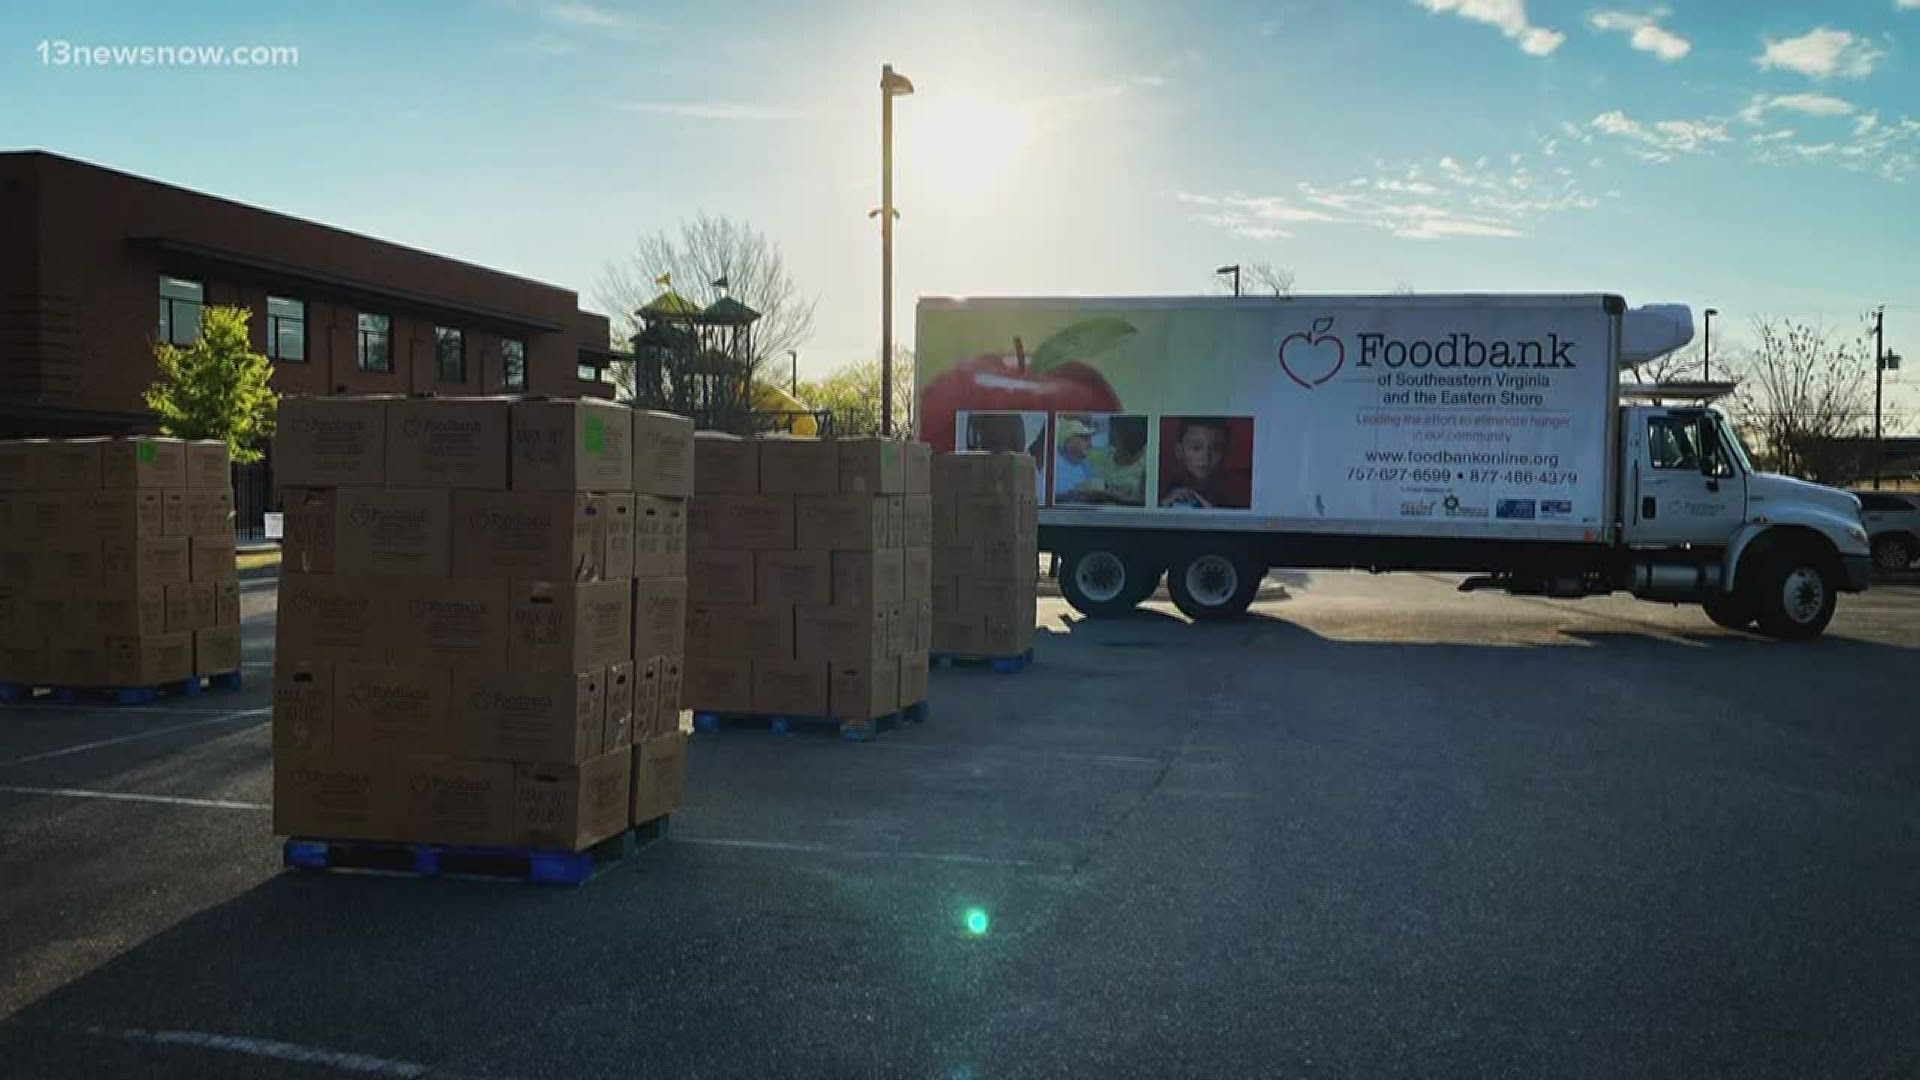 The Foodbank of Southeastern Virginia and the Eastern Shore has moved to drive-thru distribution, and needs donations to keep feeding people affected by coronavirus.